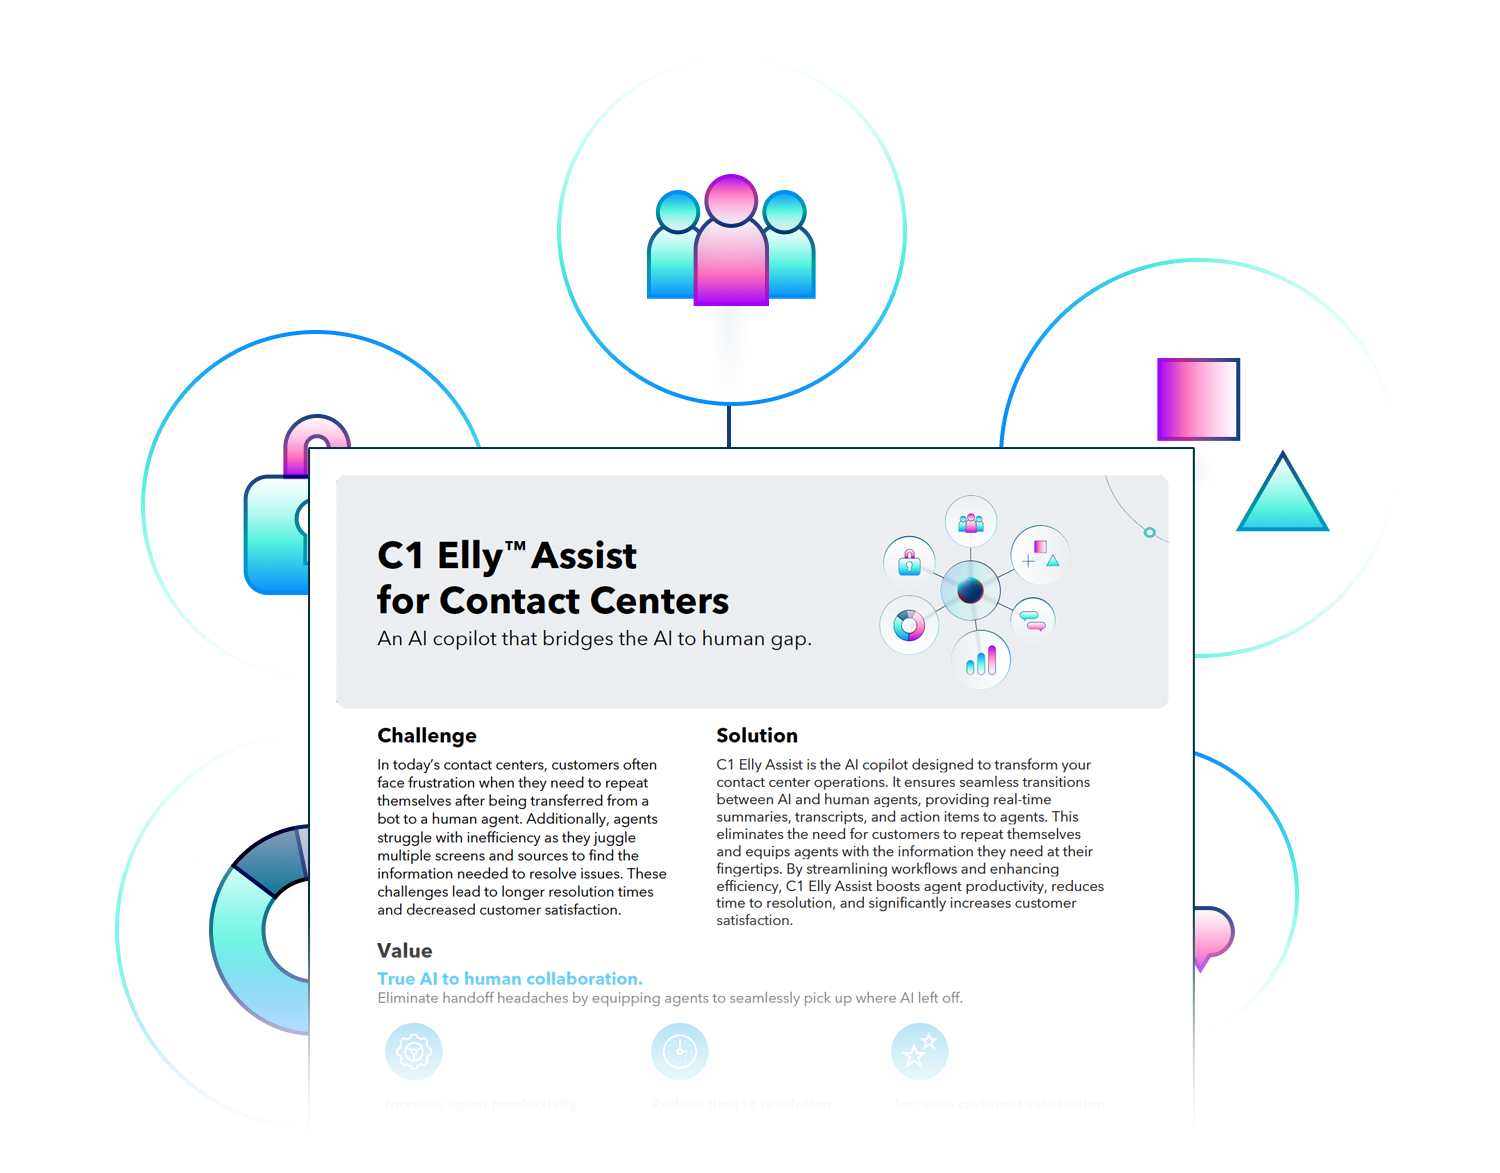 C1 Elly Assist for Contact Centers